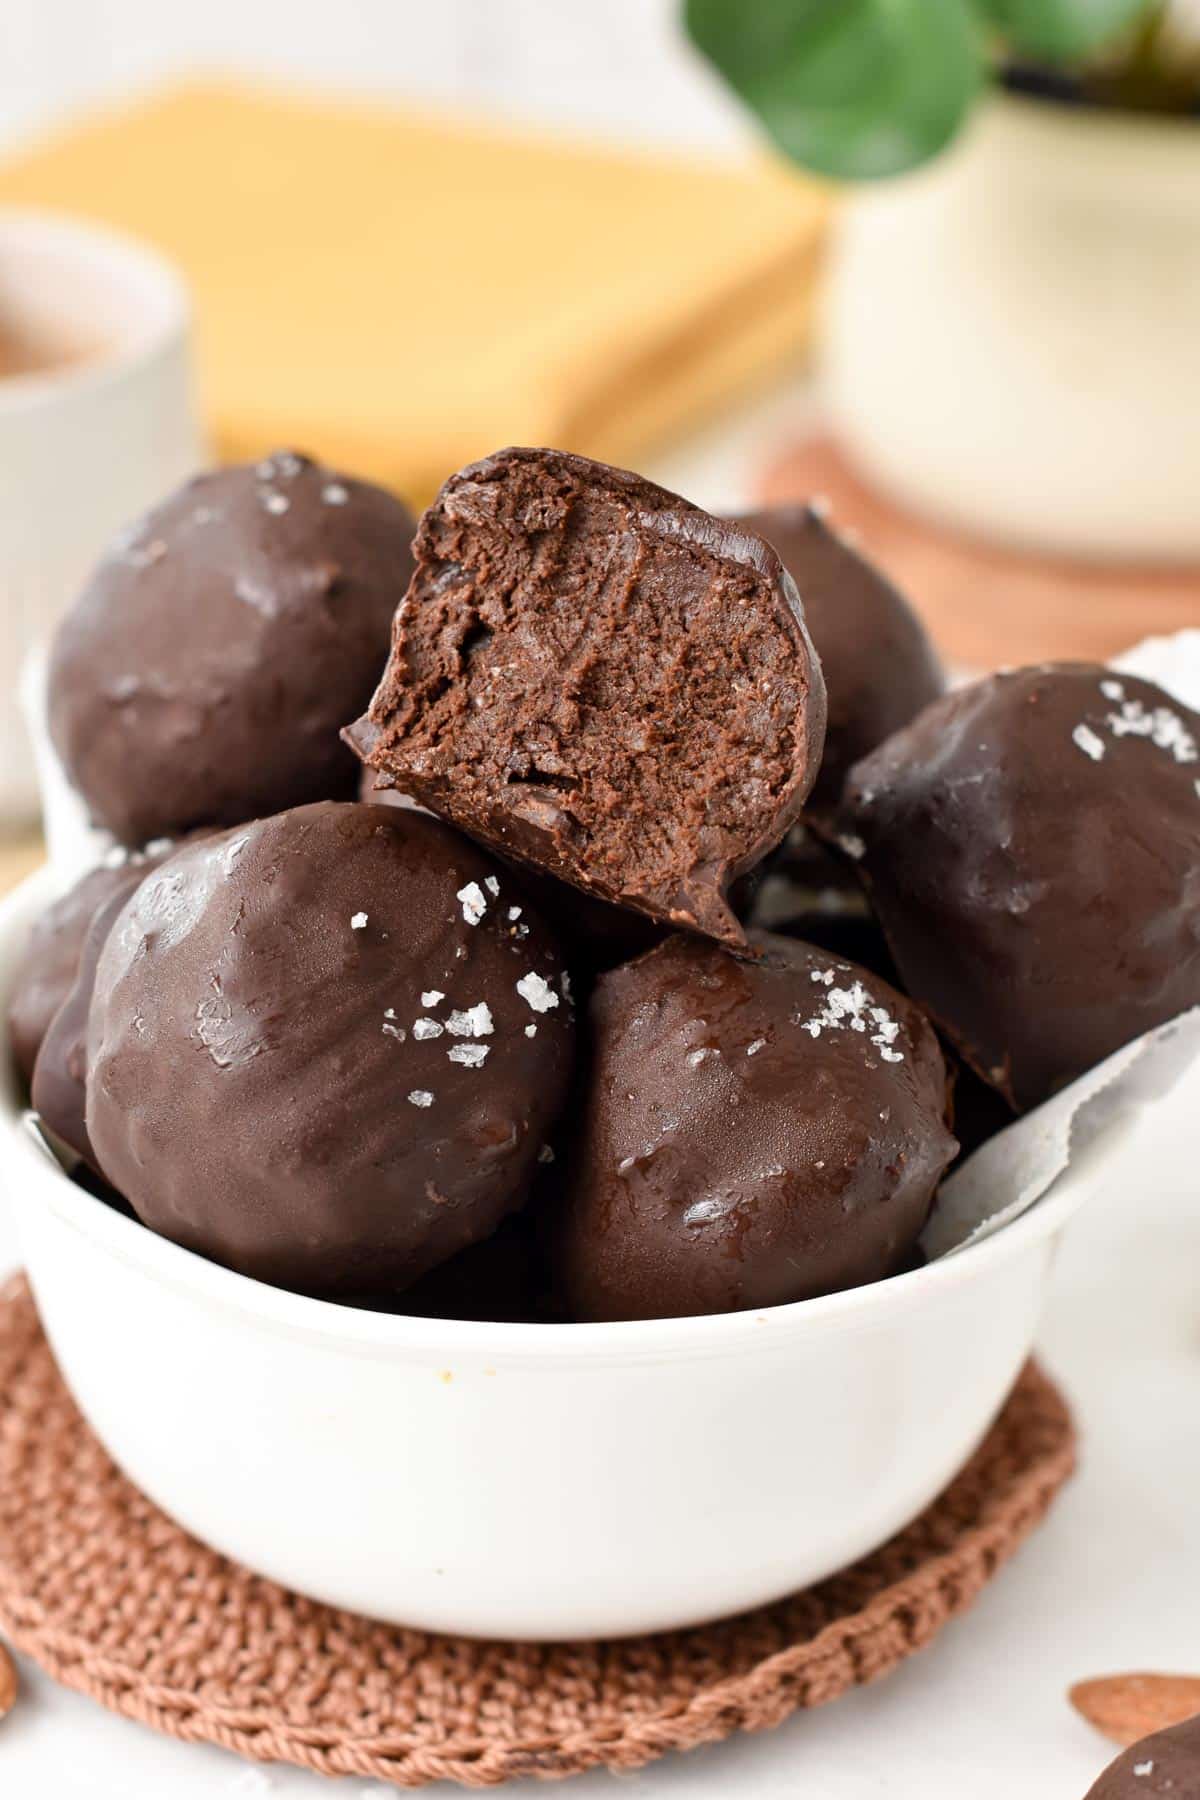 A bowl filled with no-bake brownie protein balls with one ball showing the inside chocolate fudge texture.